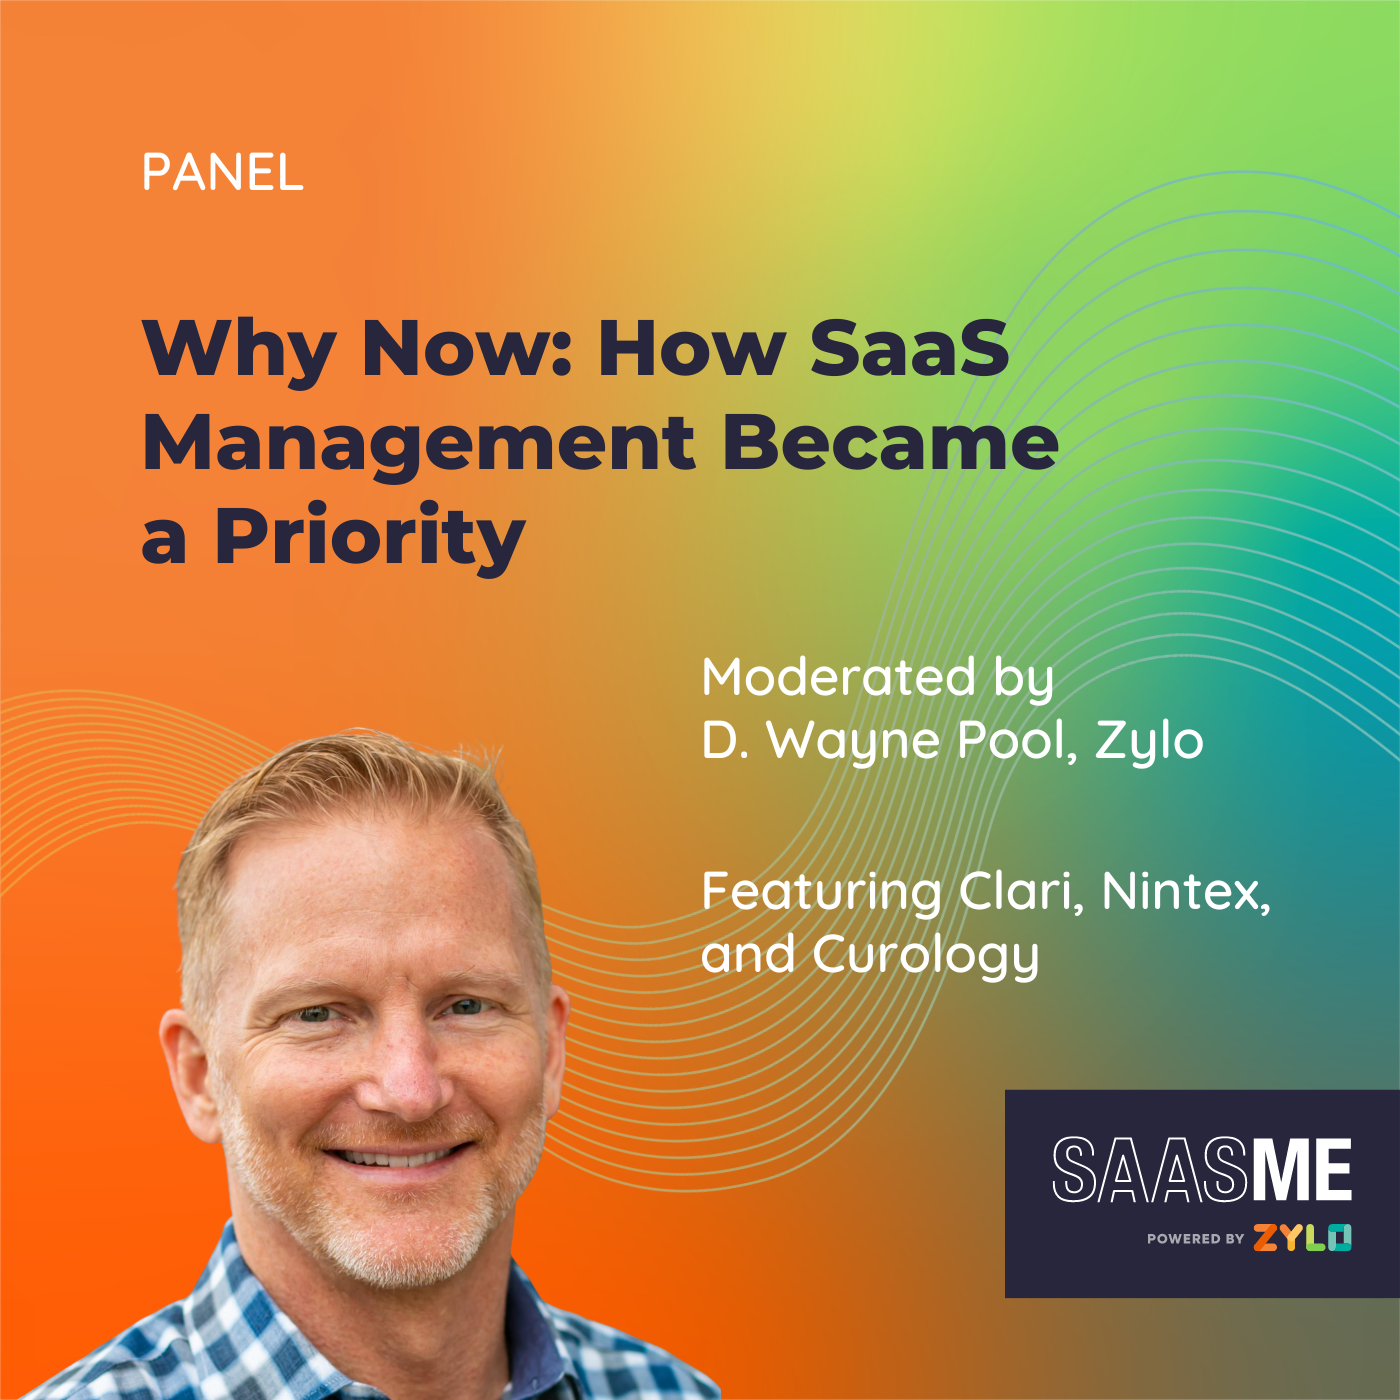 Why Now: How SaaS Management Became a Priority